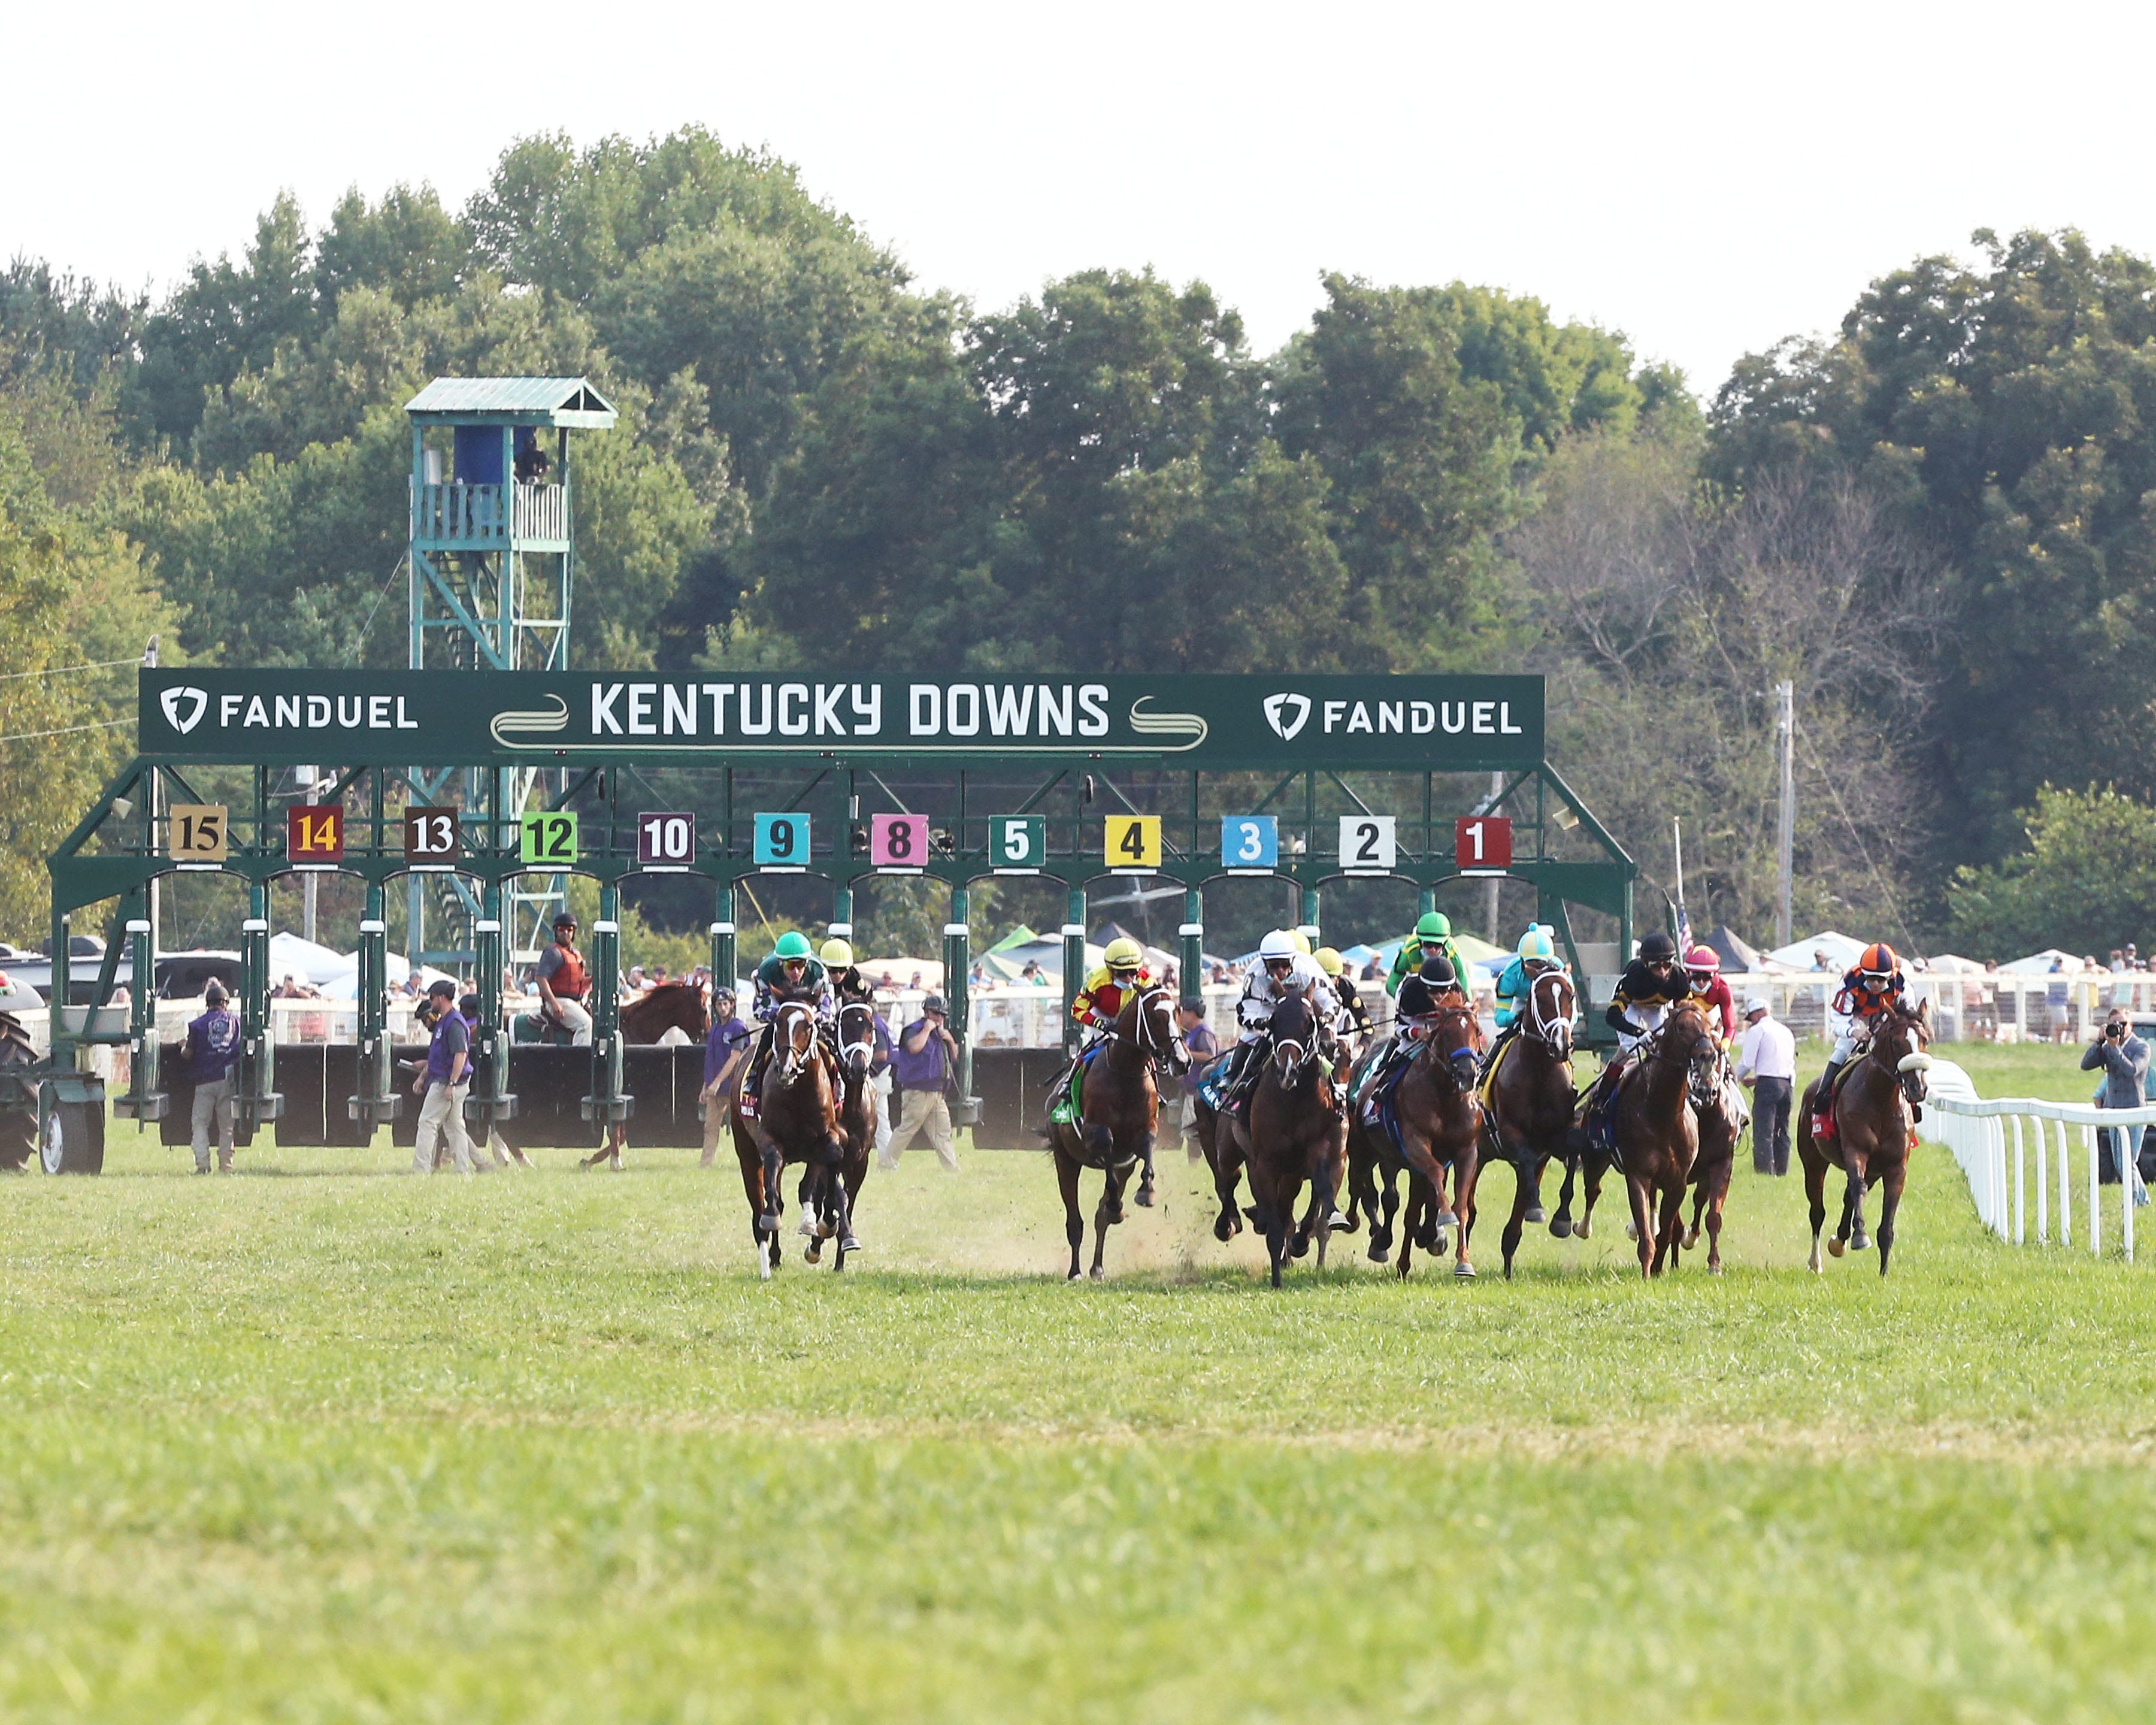 An interview with Ted Nicholson, vice president of racing at Kentucky Downs